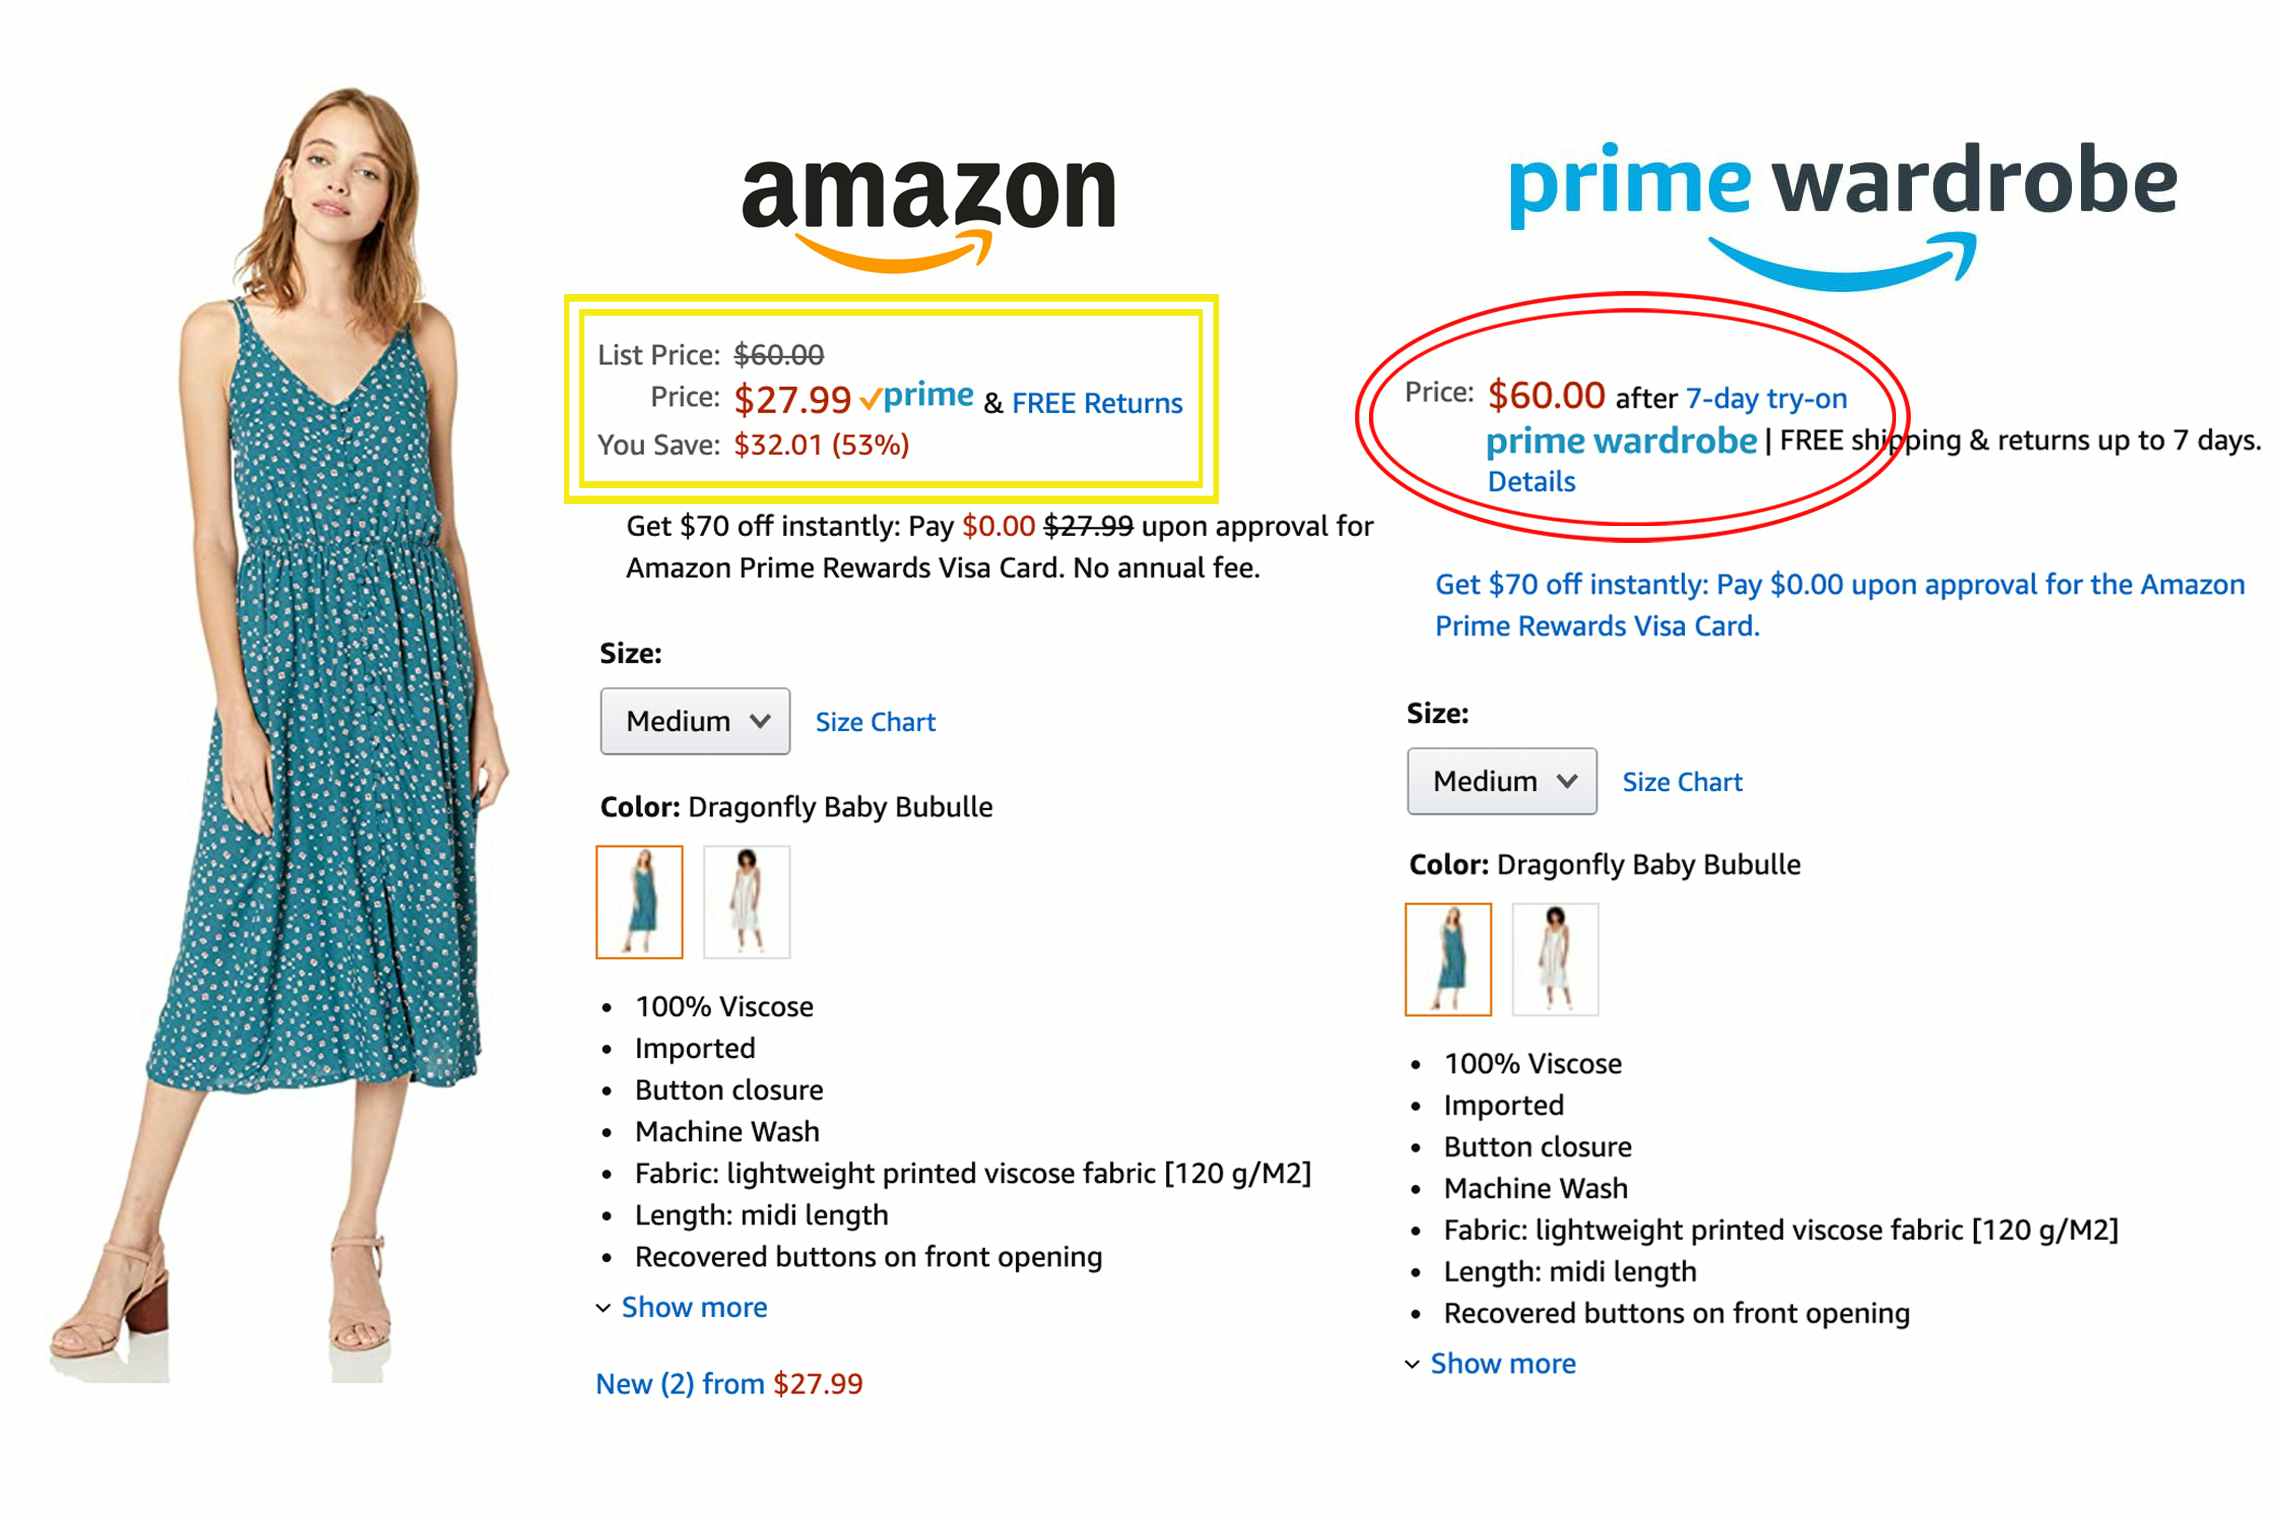 Price comparison of a dress on amazon verses the same dress from amazon prime wardrobe.